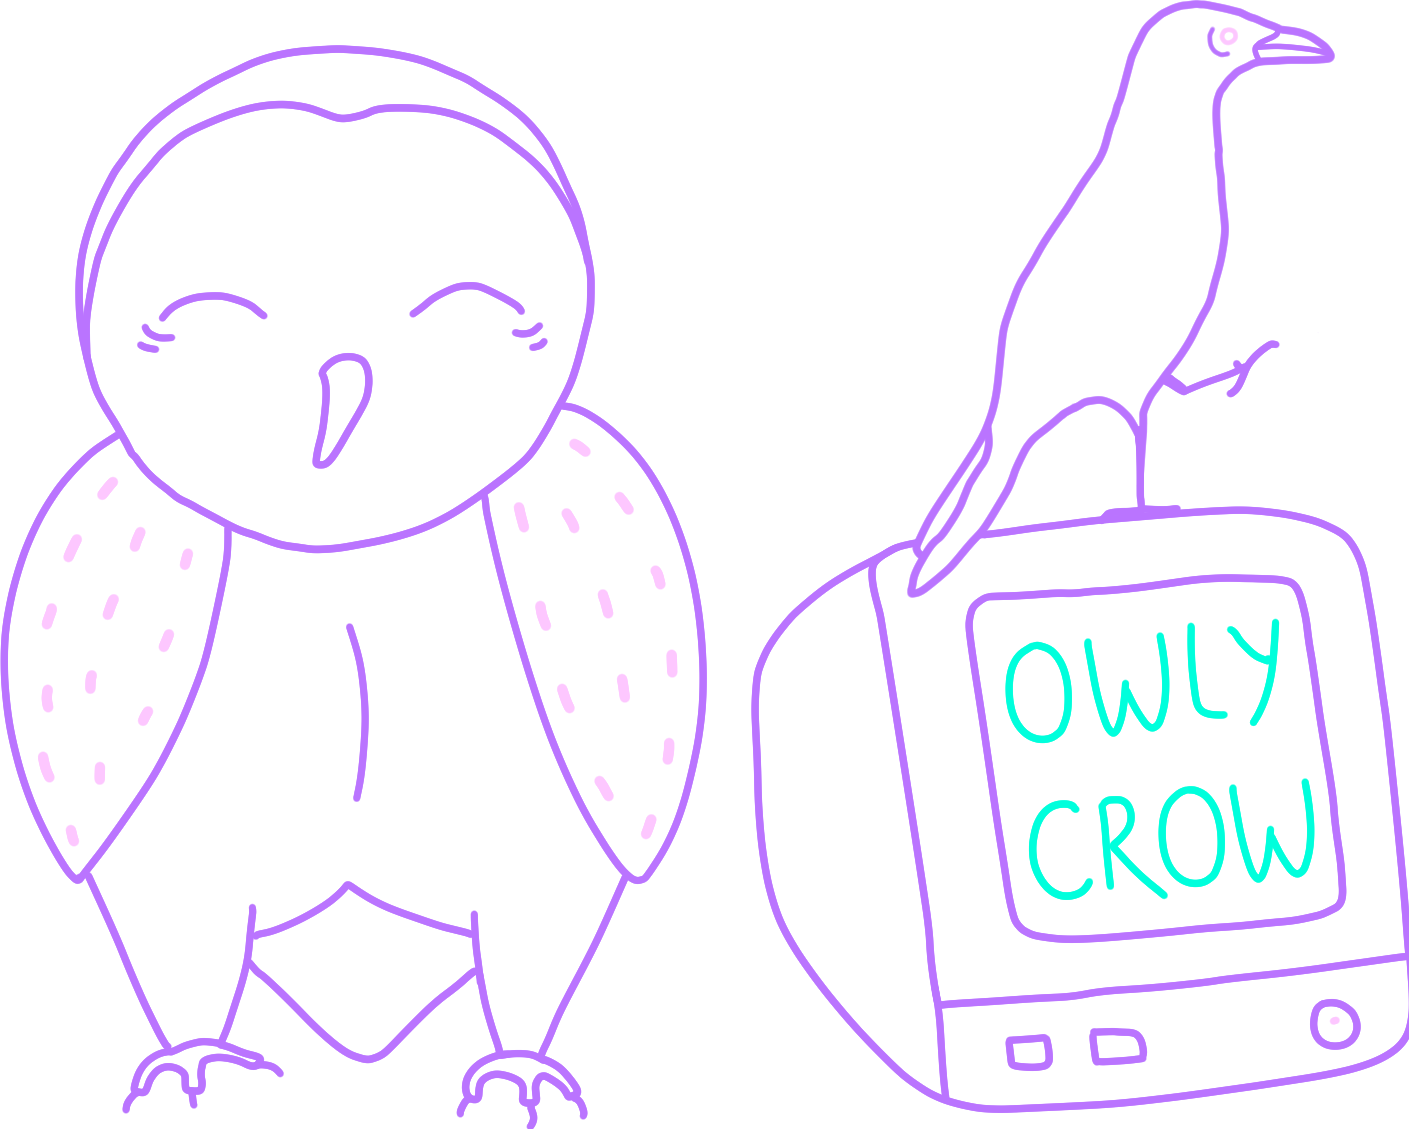 owly crow logo with a crow, an owl and a monitor